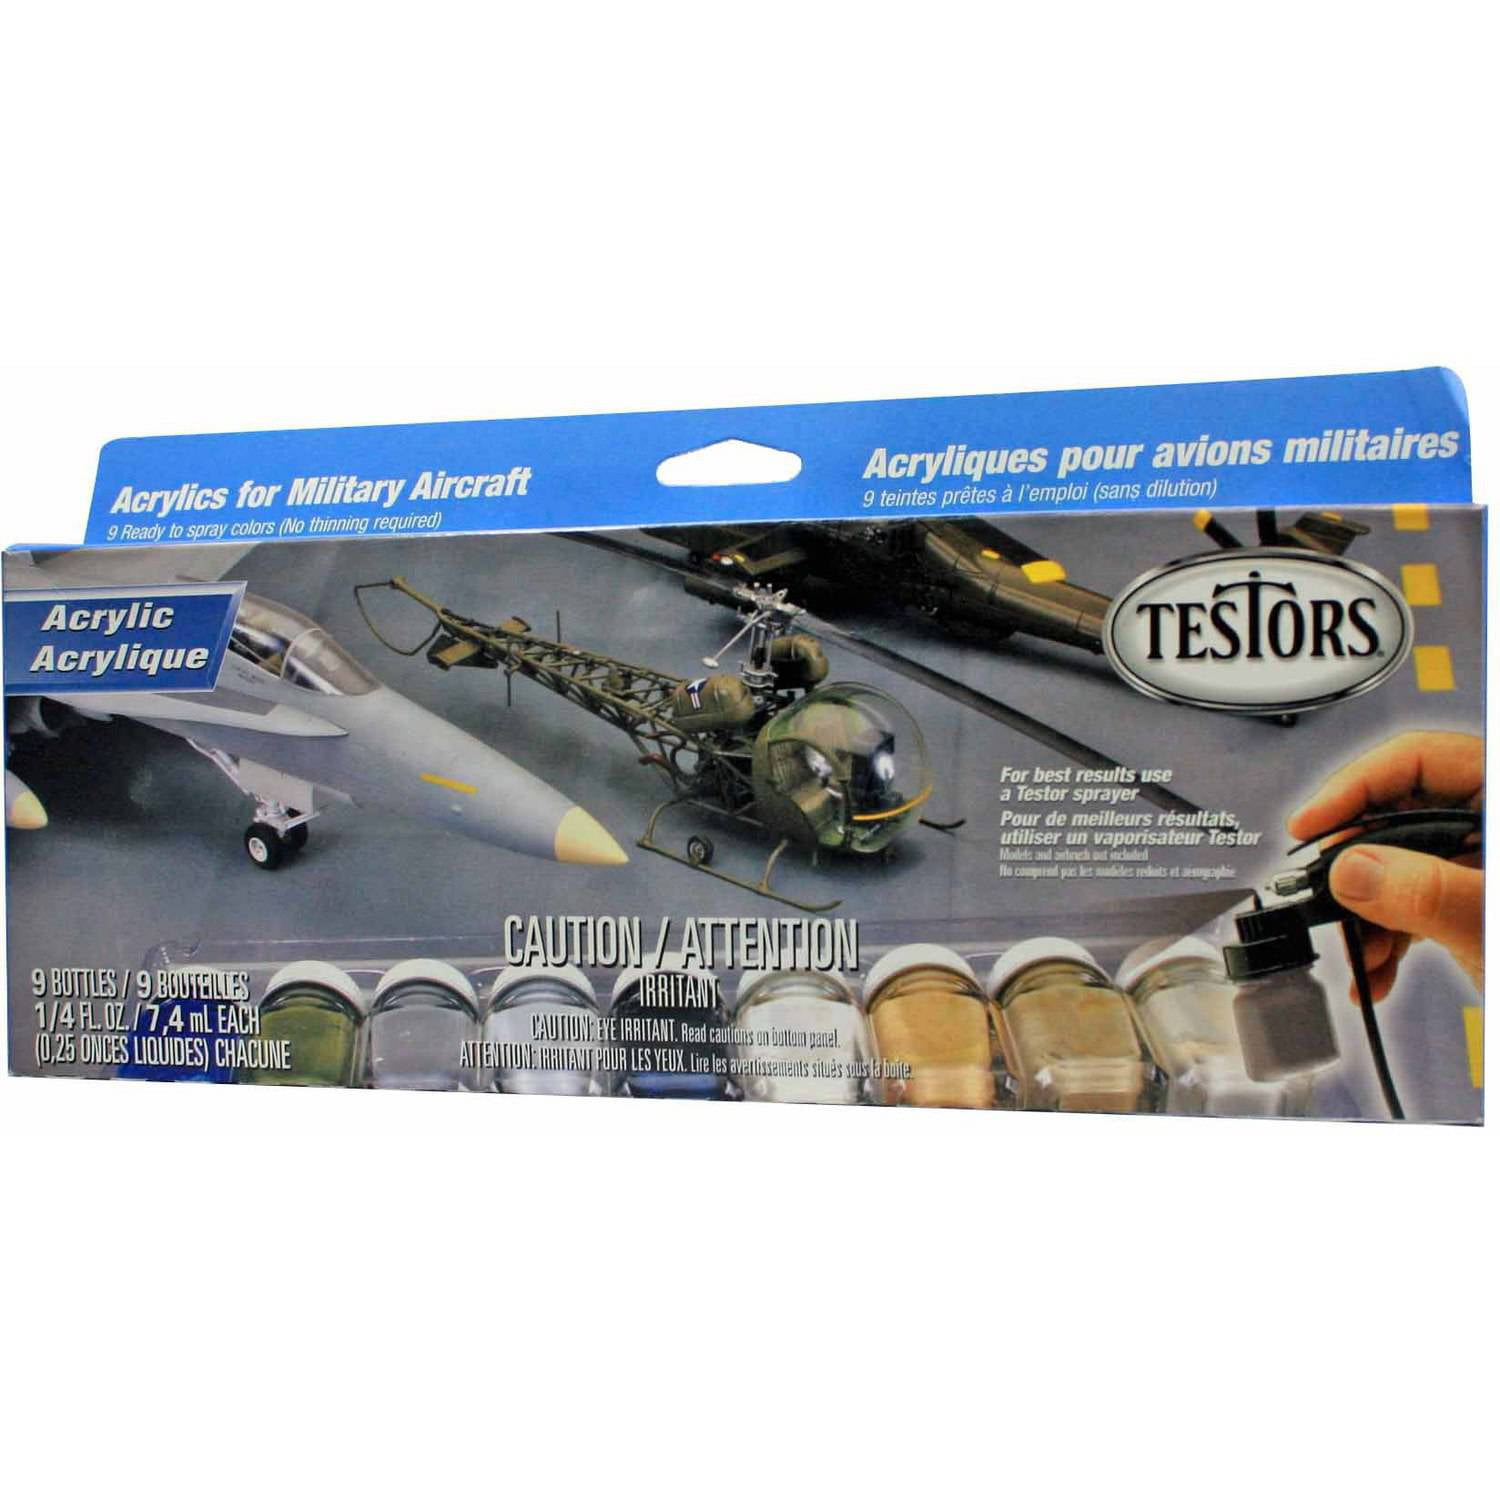 Testors 0.25 oz. 9-Color Military Aircraft Acrylic Paint Set (6-Pack) 9136  - The Home Depot